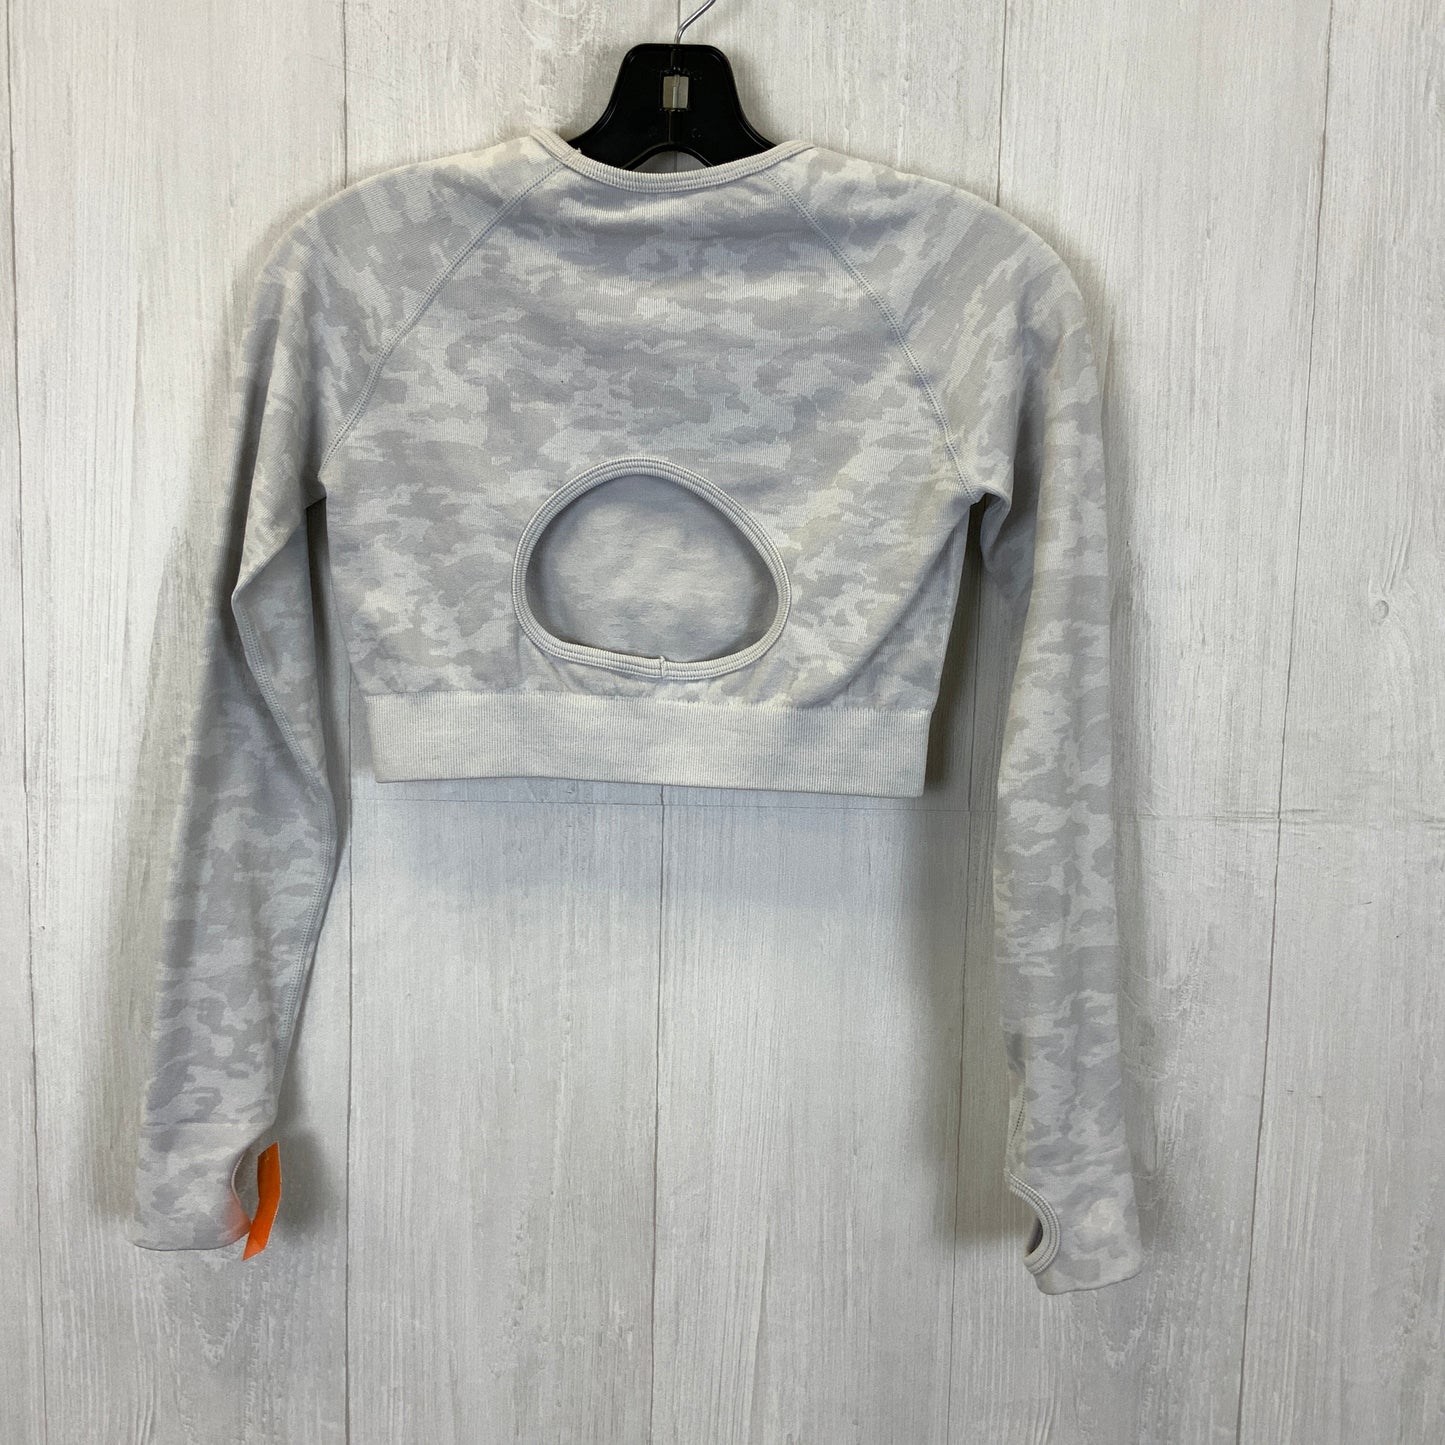 Grey Athletic Top Long Sleeve Crewneck Clothes Mentor, Size S